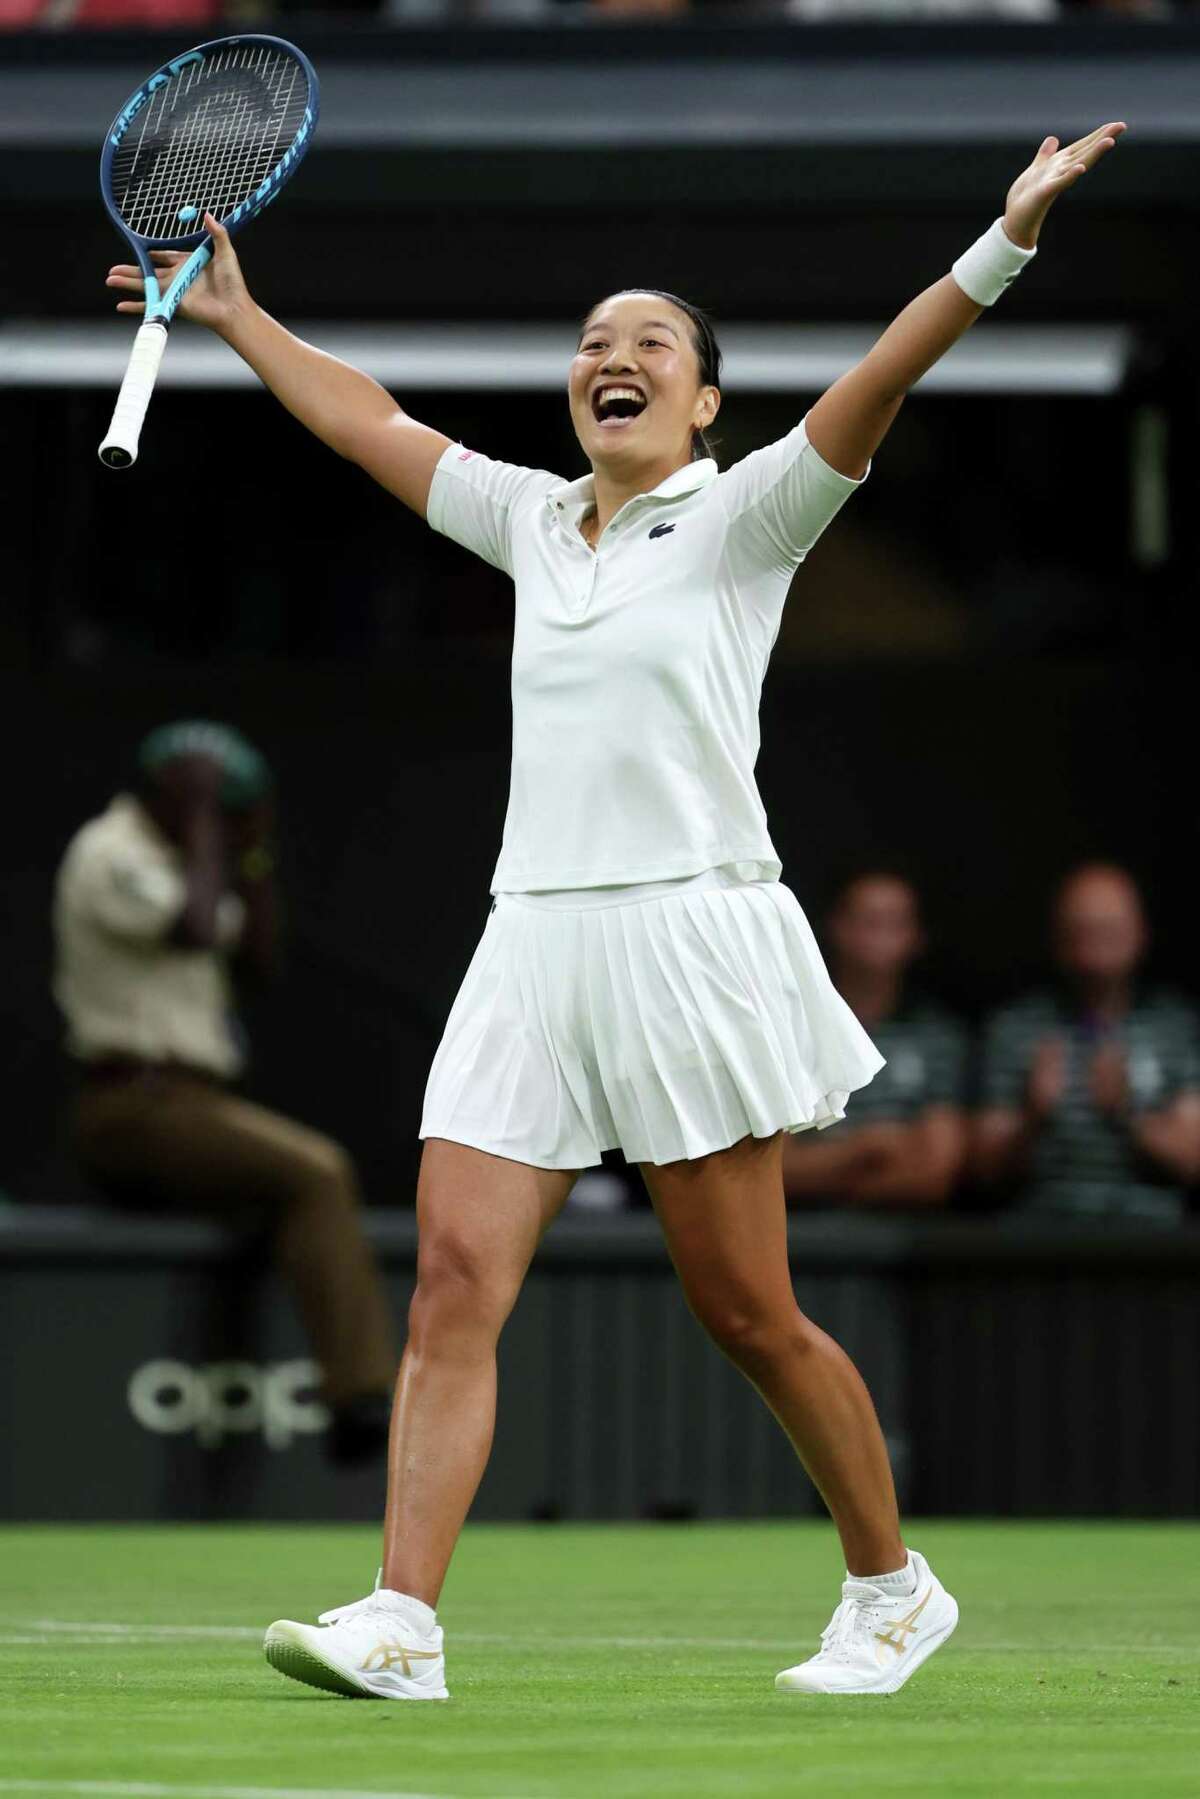 LONDON, ENGLAND - JUNE 28: Harmony Tan of France celebrates after winning match point against Serena Williams of The United States during their Women's Singles First Round Match on day two of The Championships Wimbledon 2022 at All England Lawn Tennis and Croquet Club on June 28, 2022 in London, England. (Photo by Clive Brunskill/Getty Images)